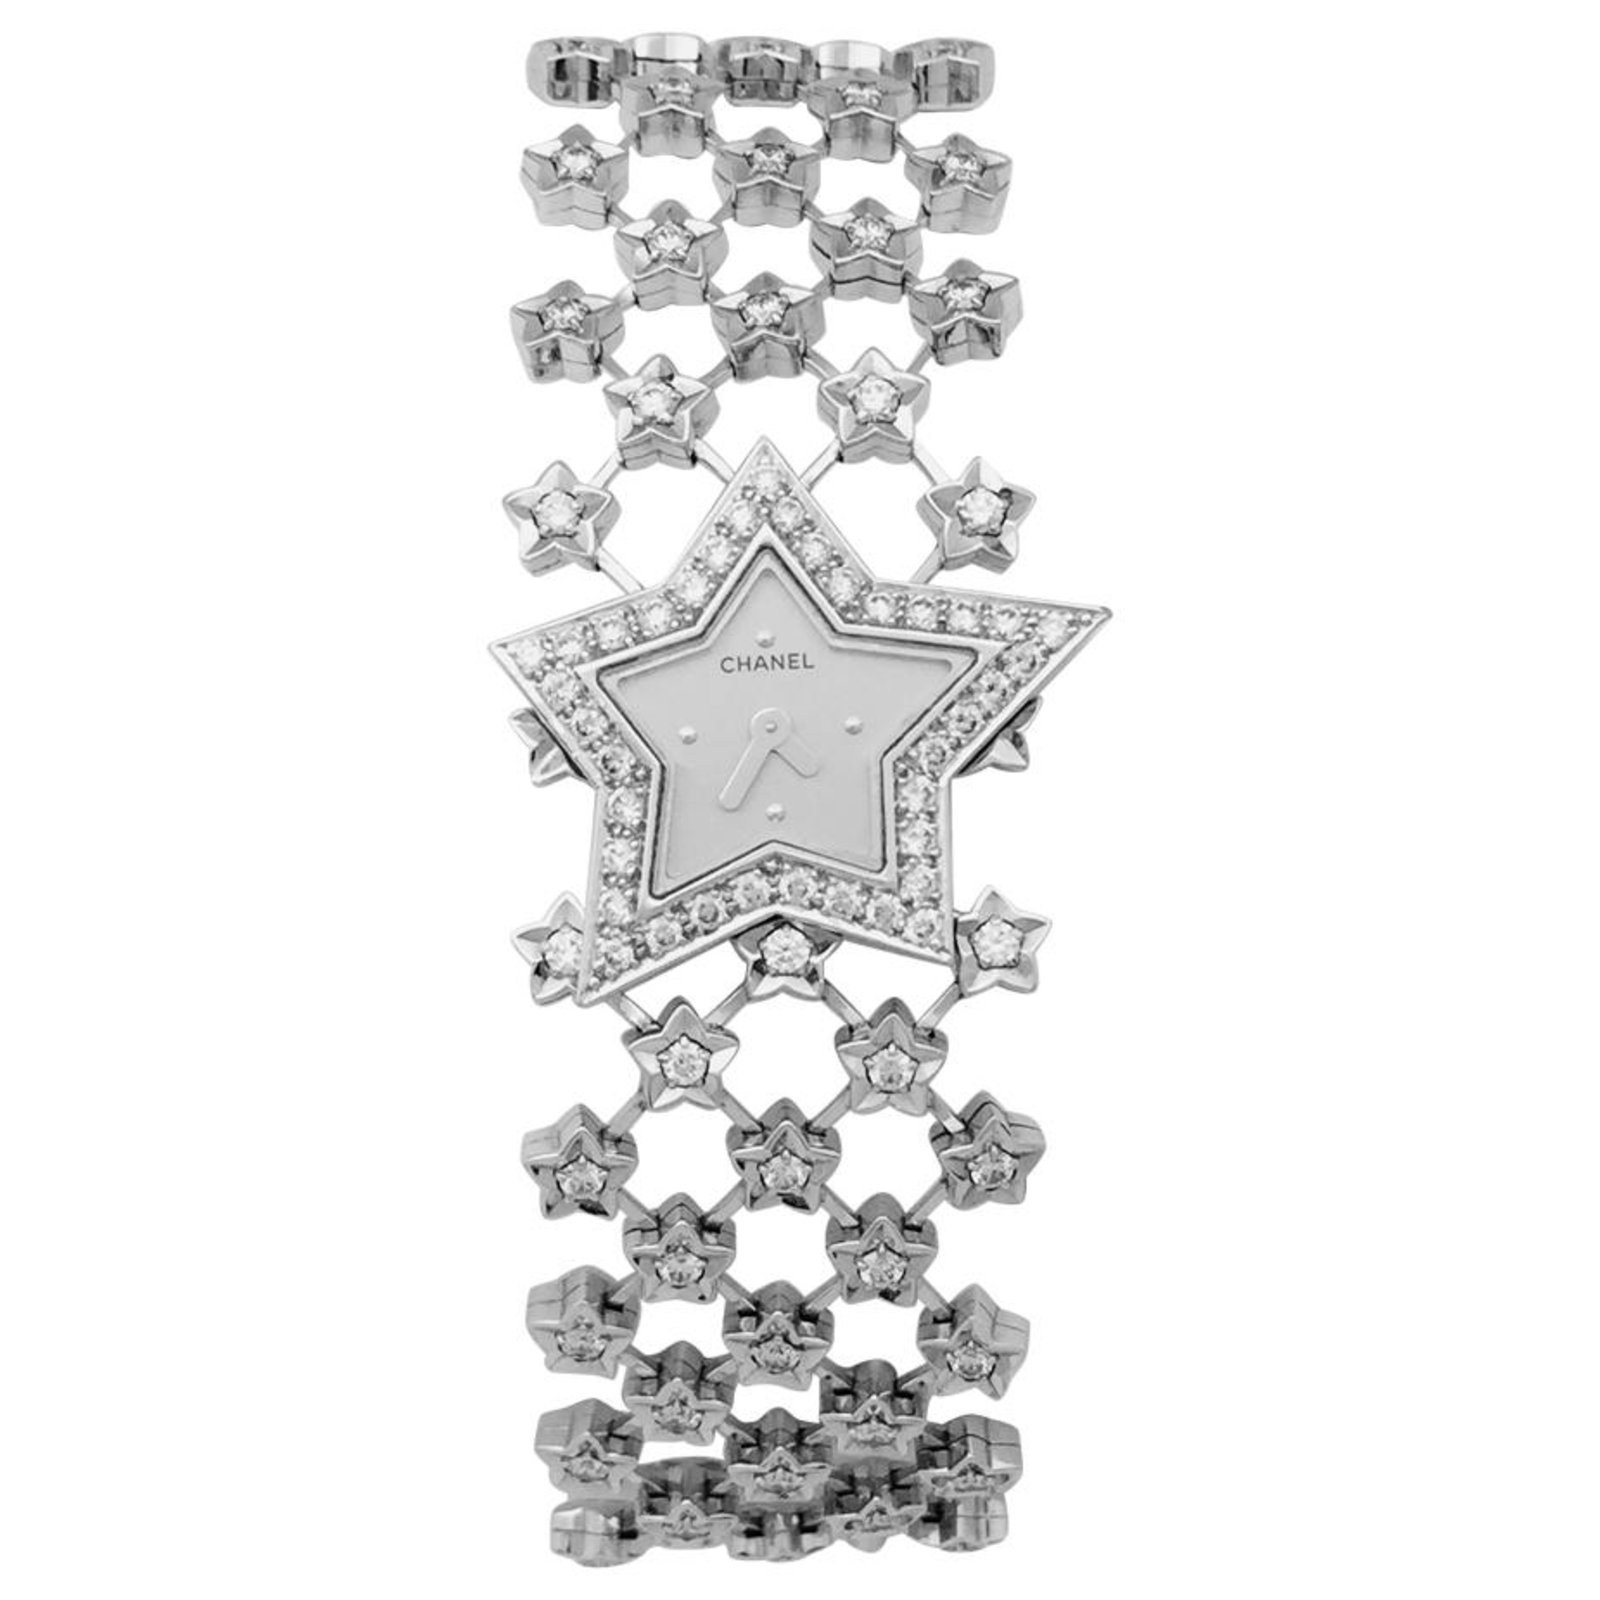 Chanel jewelery watch model Star dust in white gold and diamonds